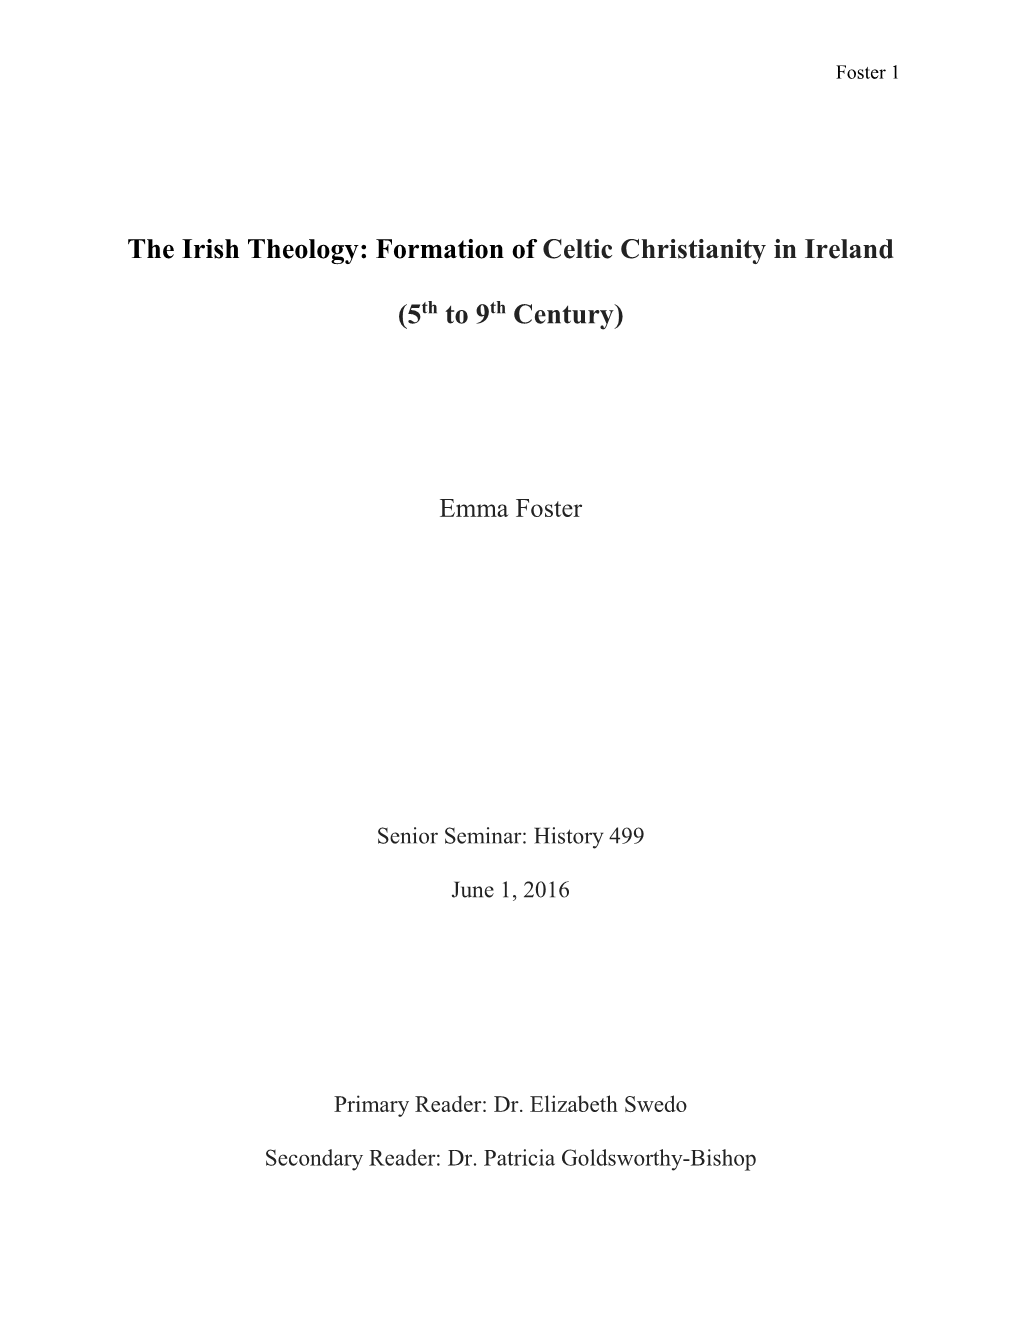 The Irish Theology: Formation of Celtic Christianity in Ireland (5Th to 9Th